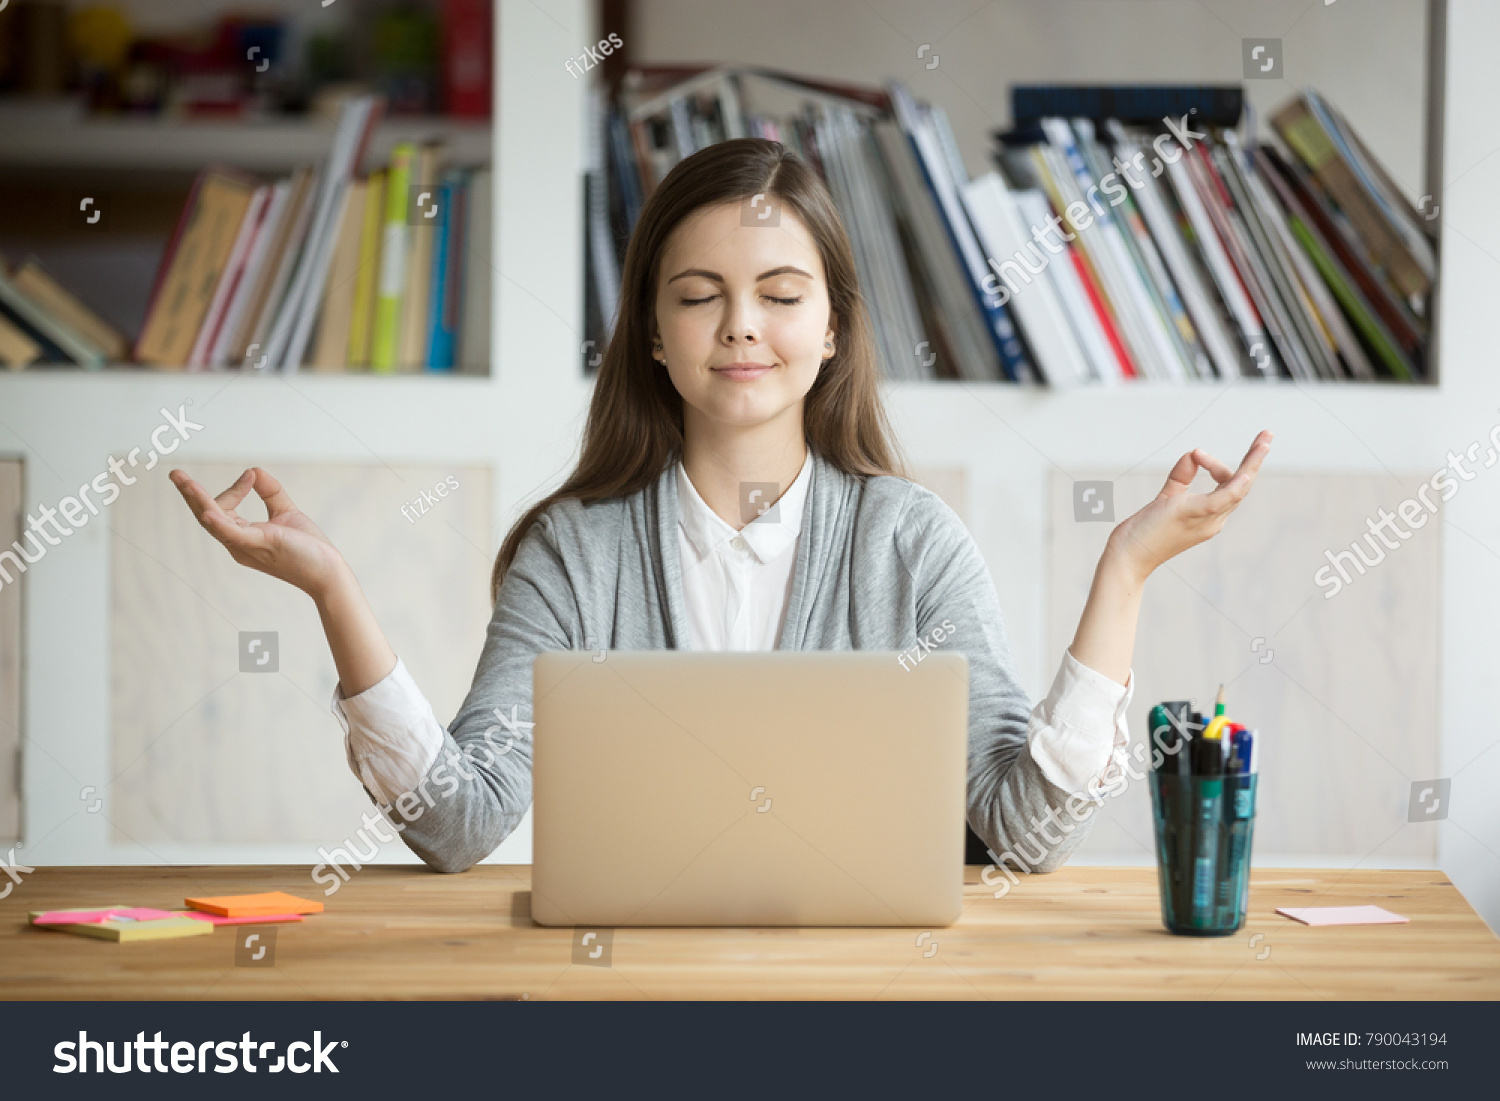 Calm woman relaxing meditating with laptop, no stress free relief at work concept, mindful peaceful young businesswoman or student practicing breathing yoga exercises at workplace, office meditation #790043194